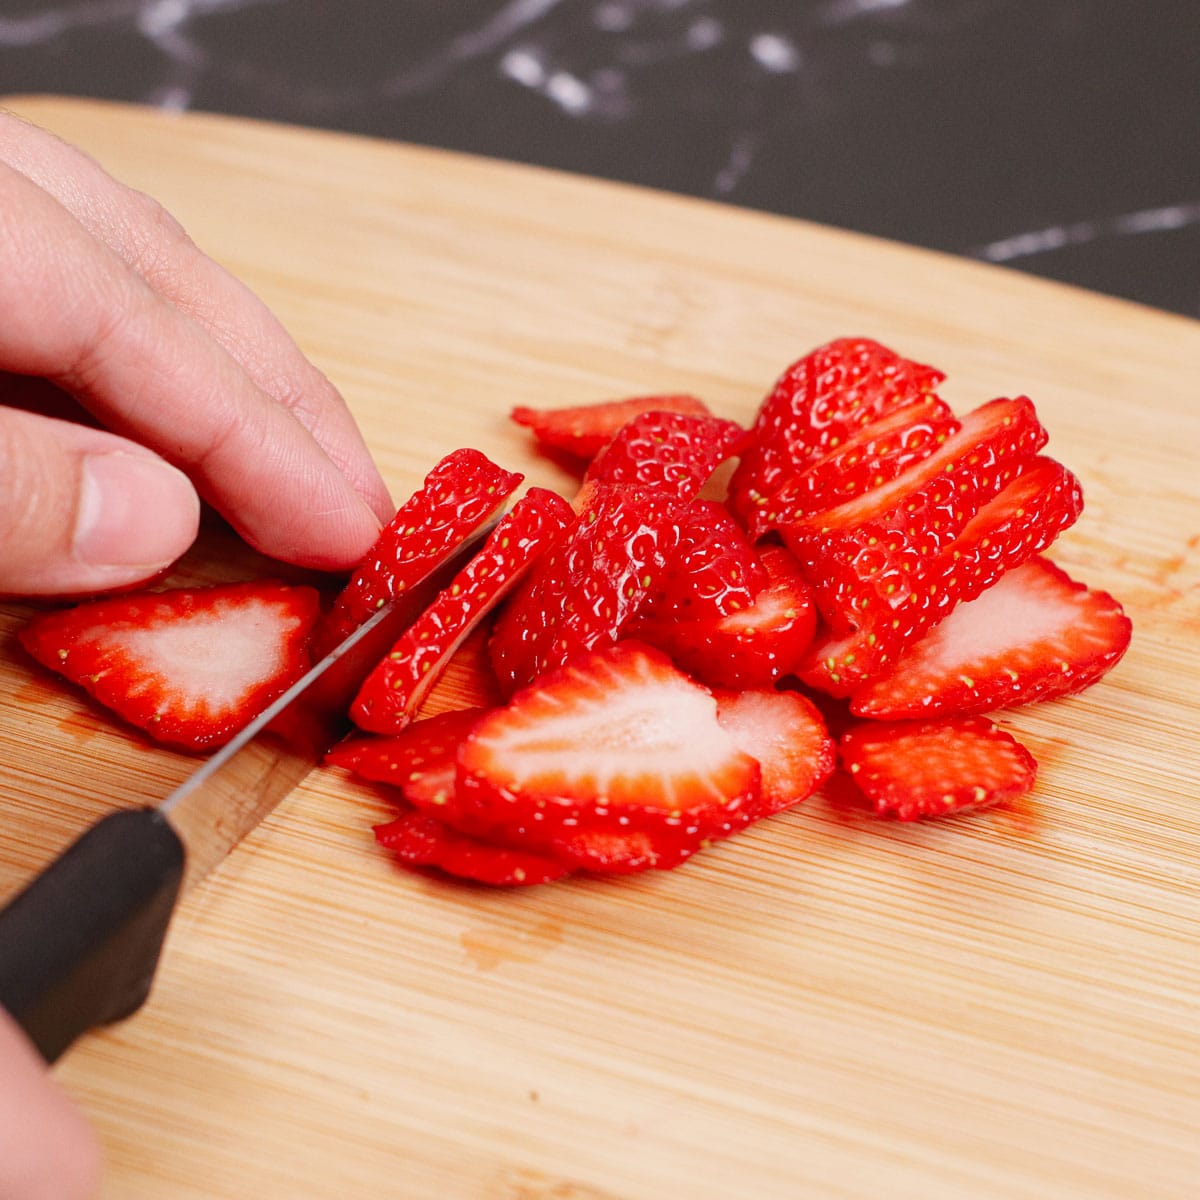 Slicing strawberries thinly